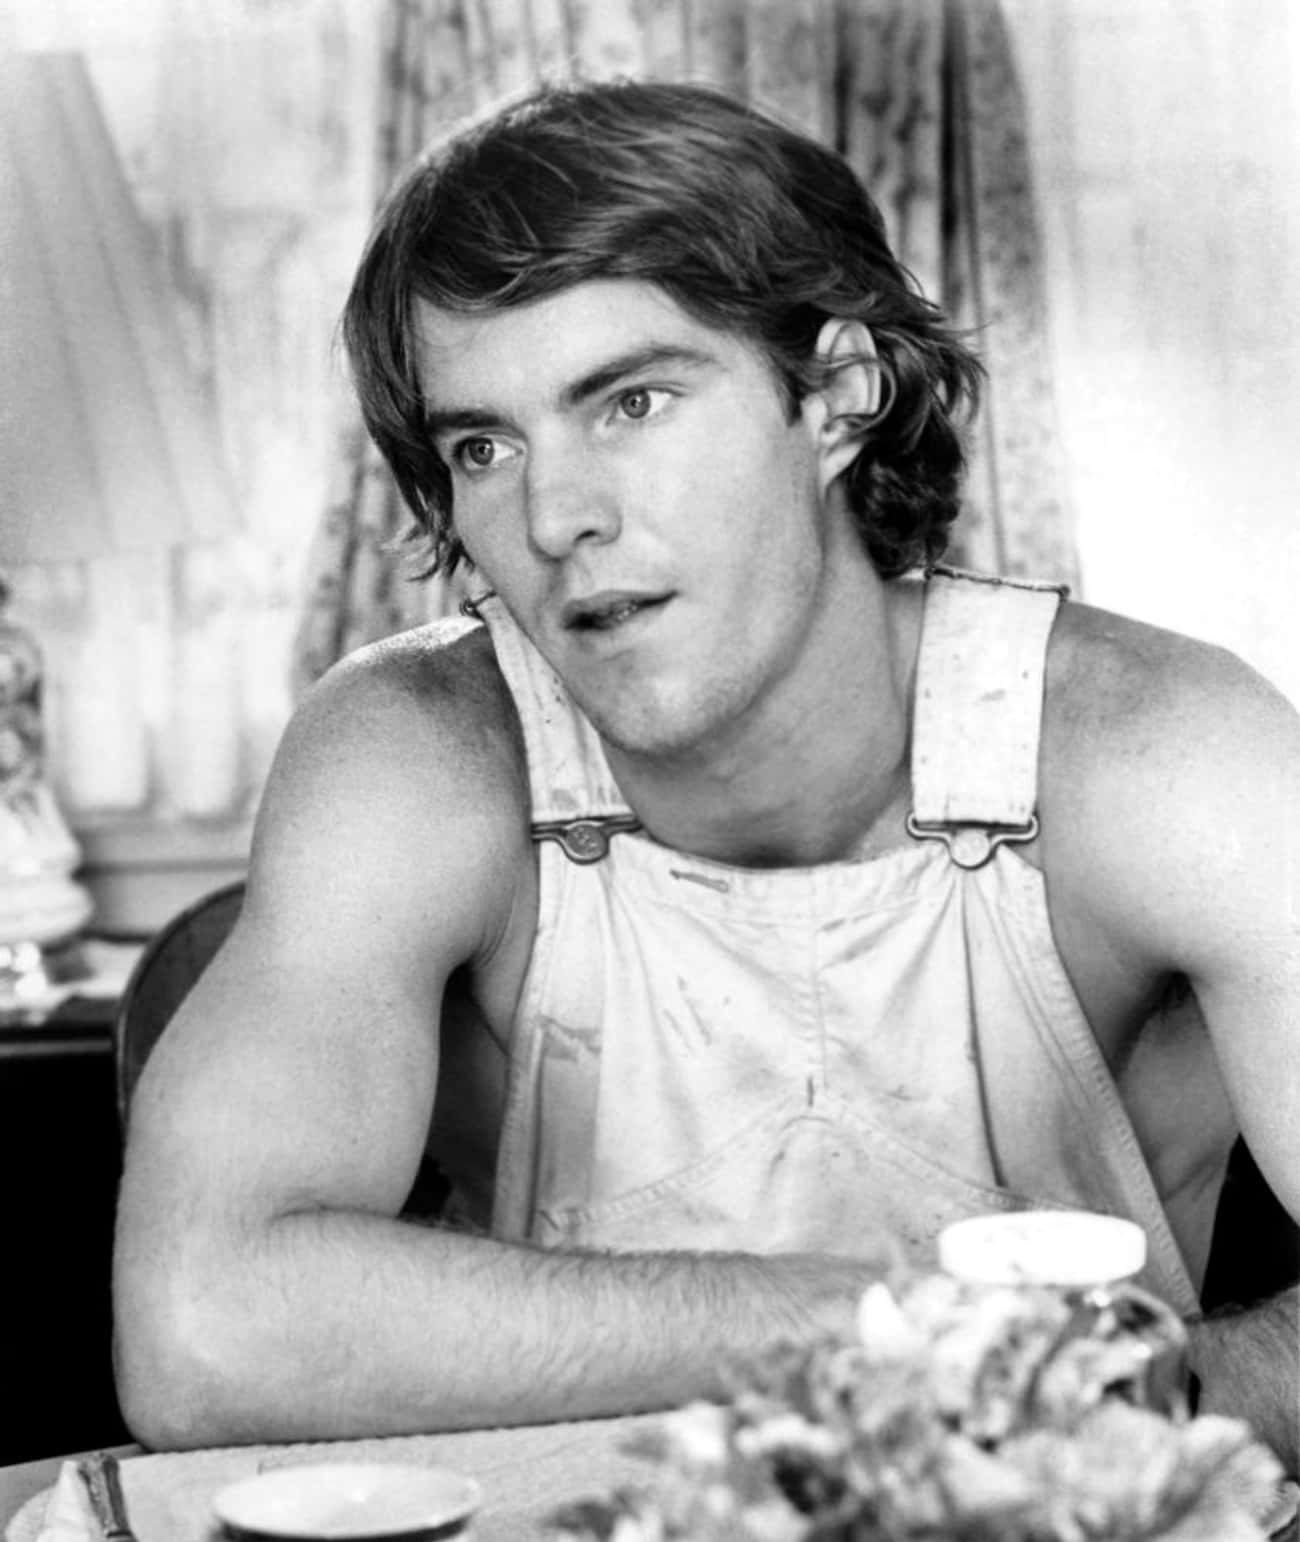 Young Dennis Quaid in White Overalls